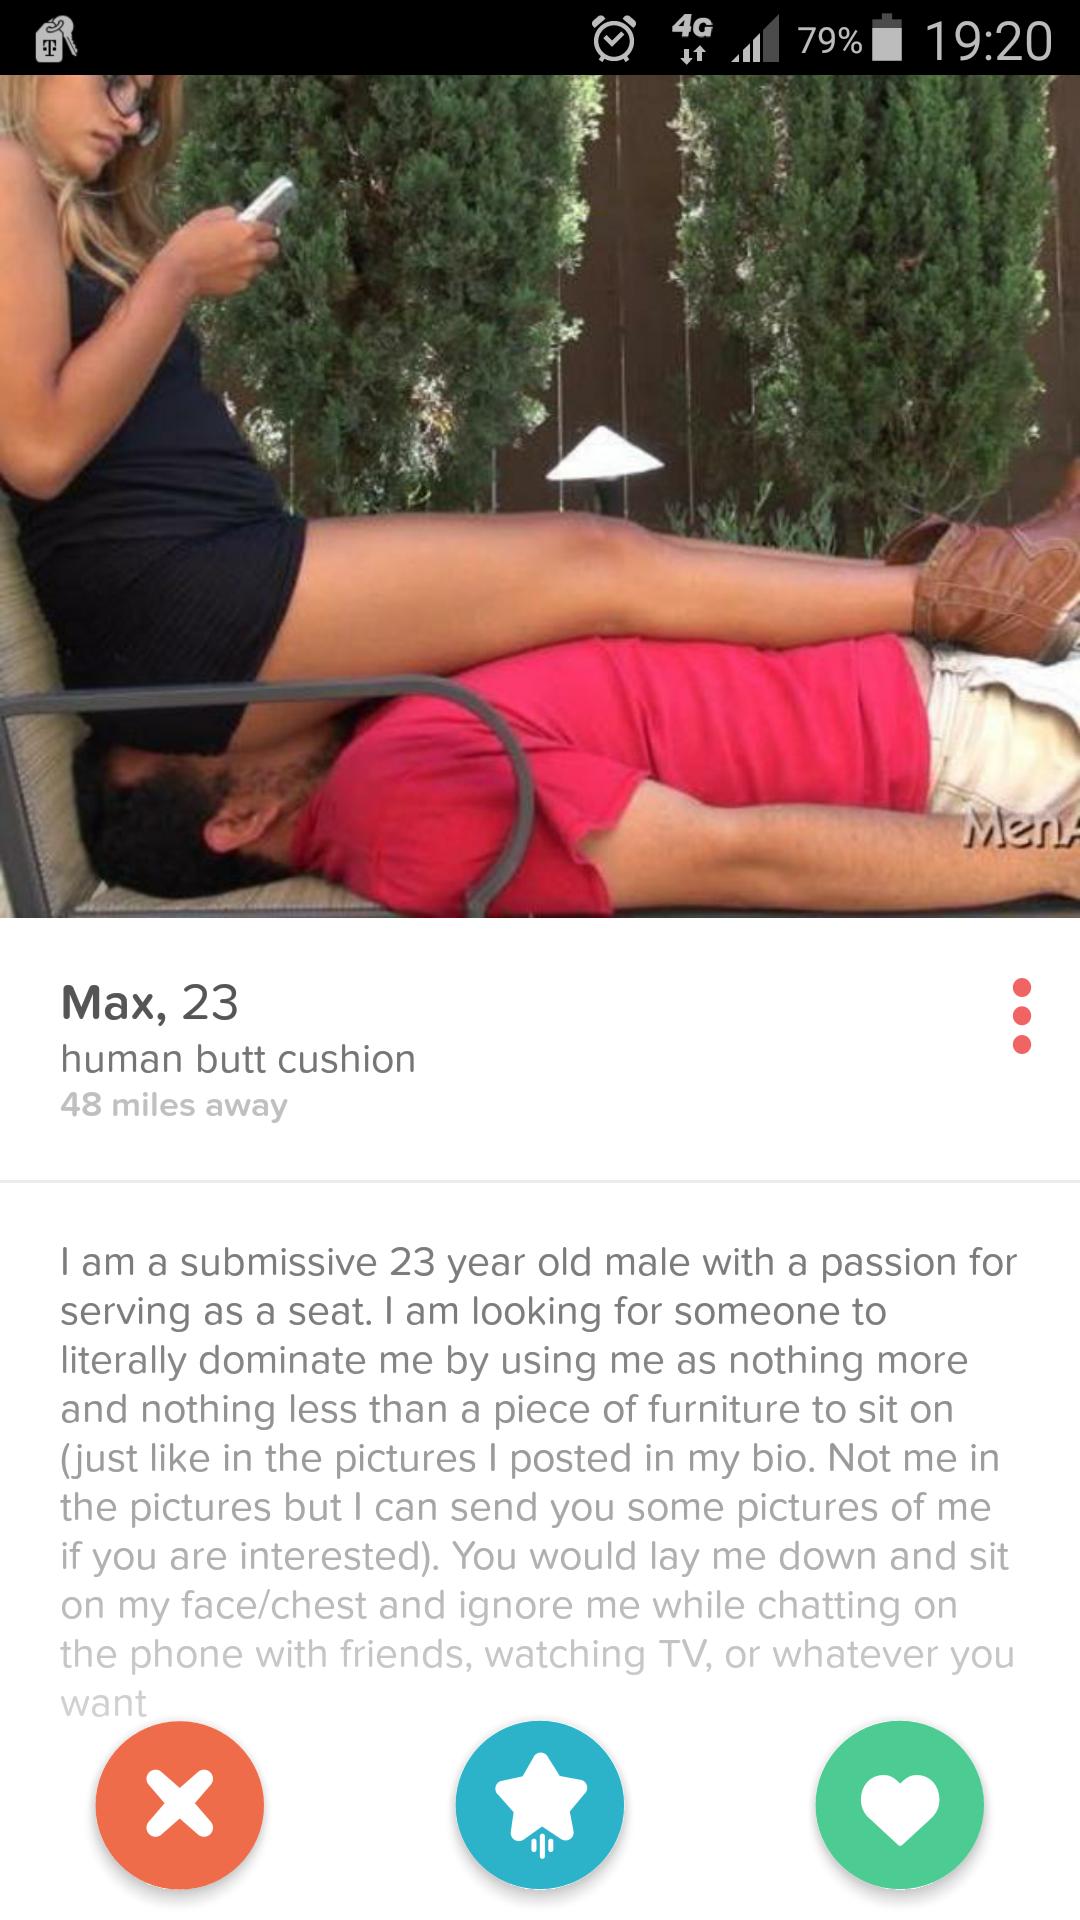 30 Eye-catching Tinder Profiles That You Don't See Everyday